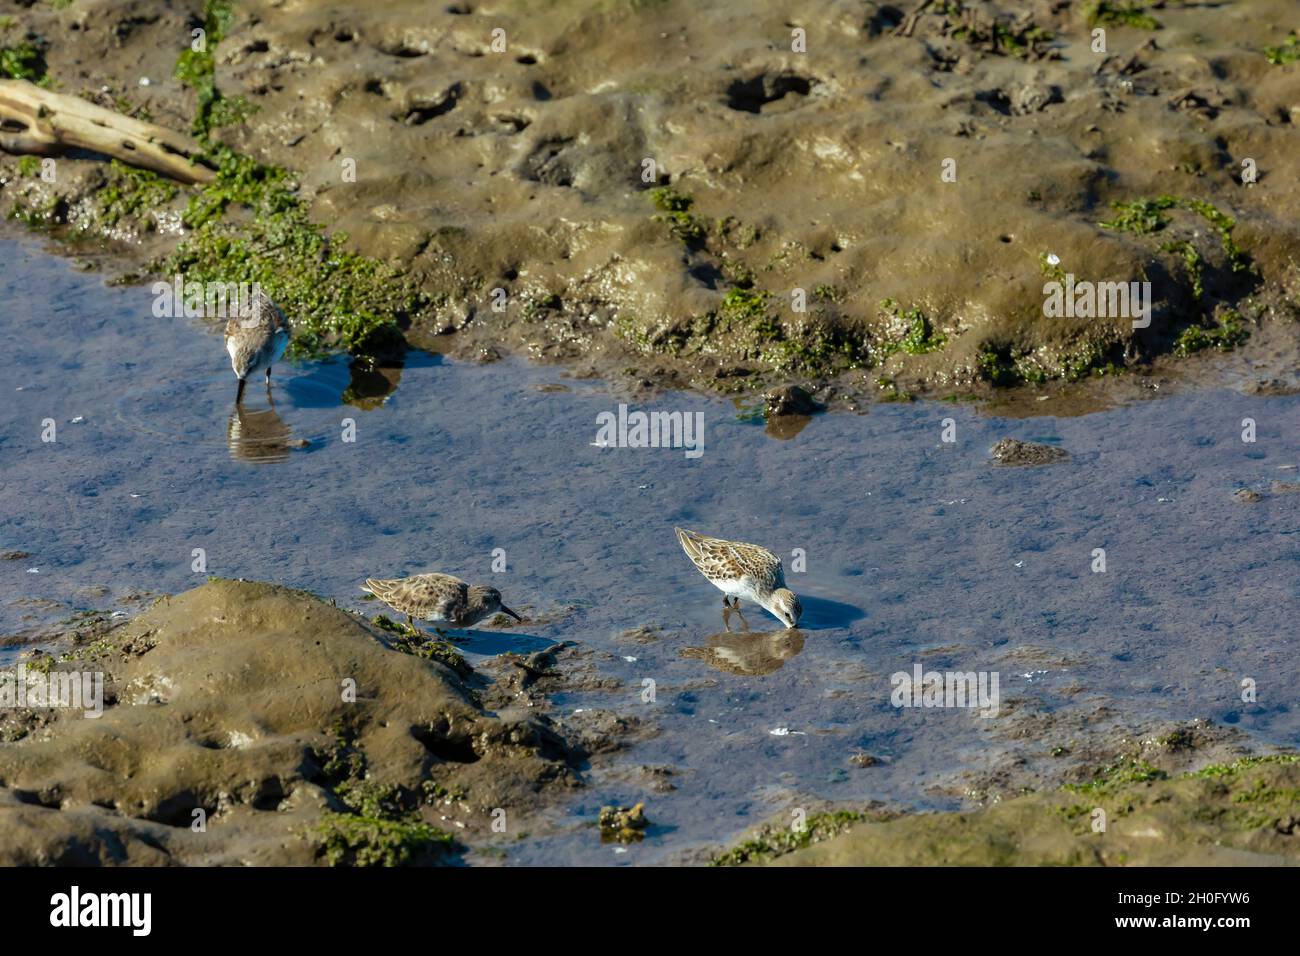 Least Sandpiper, Calidris minutilla, and Western Sandpiper, Calidris mauri, foraging at low tide in Billy Frank Jr. Nisqually National Wildlife Refuge Stock Photo